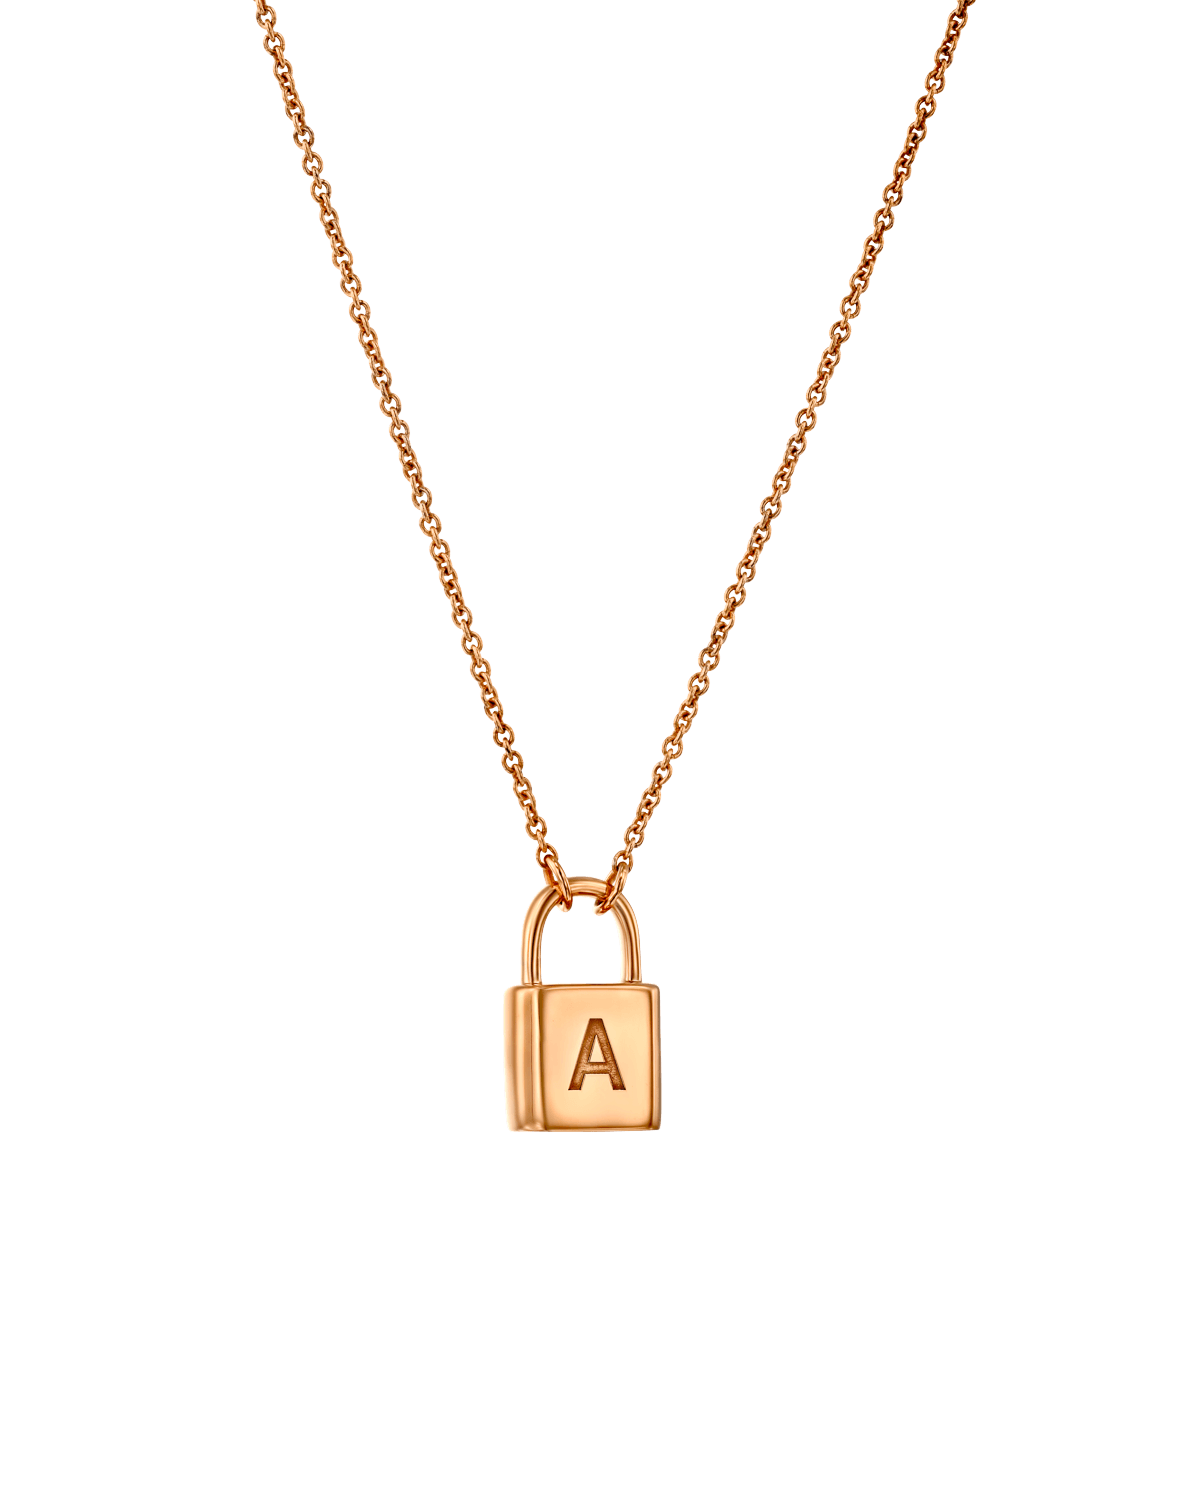 Personalised Monogram Necklace | Shop Now | Frankly My Dear Store